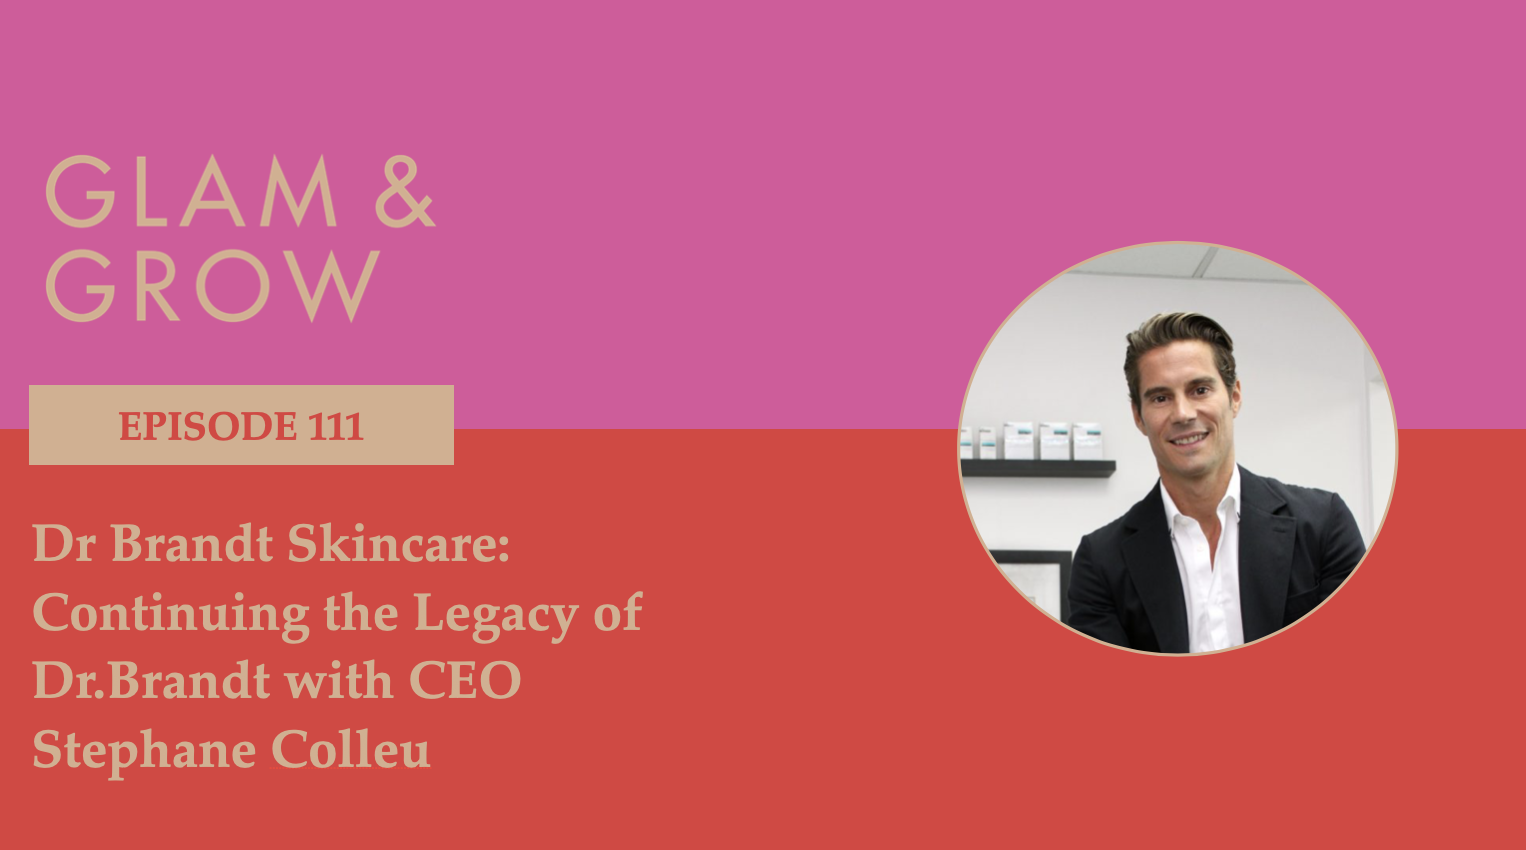 Episode 111: Dr Brandt Skincare: Continuing the Legacy of Dr.Brandt with  CEO Stephane Colleu — Glam & Grow Podcast